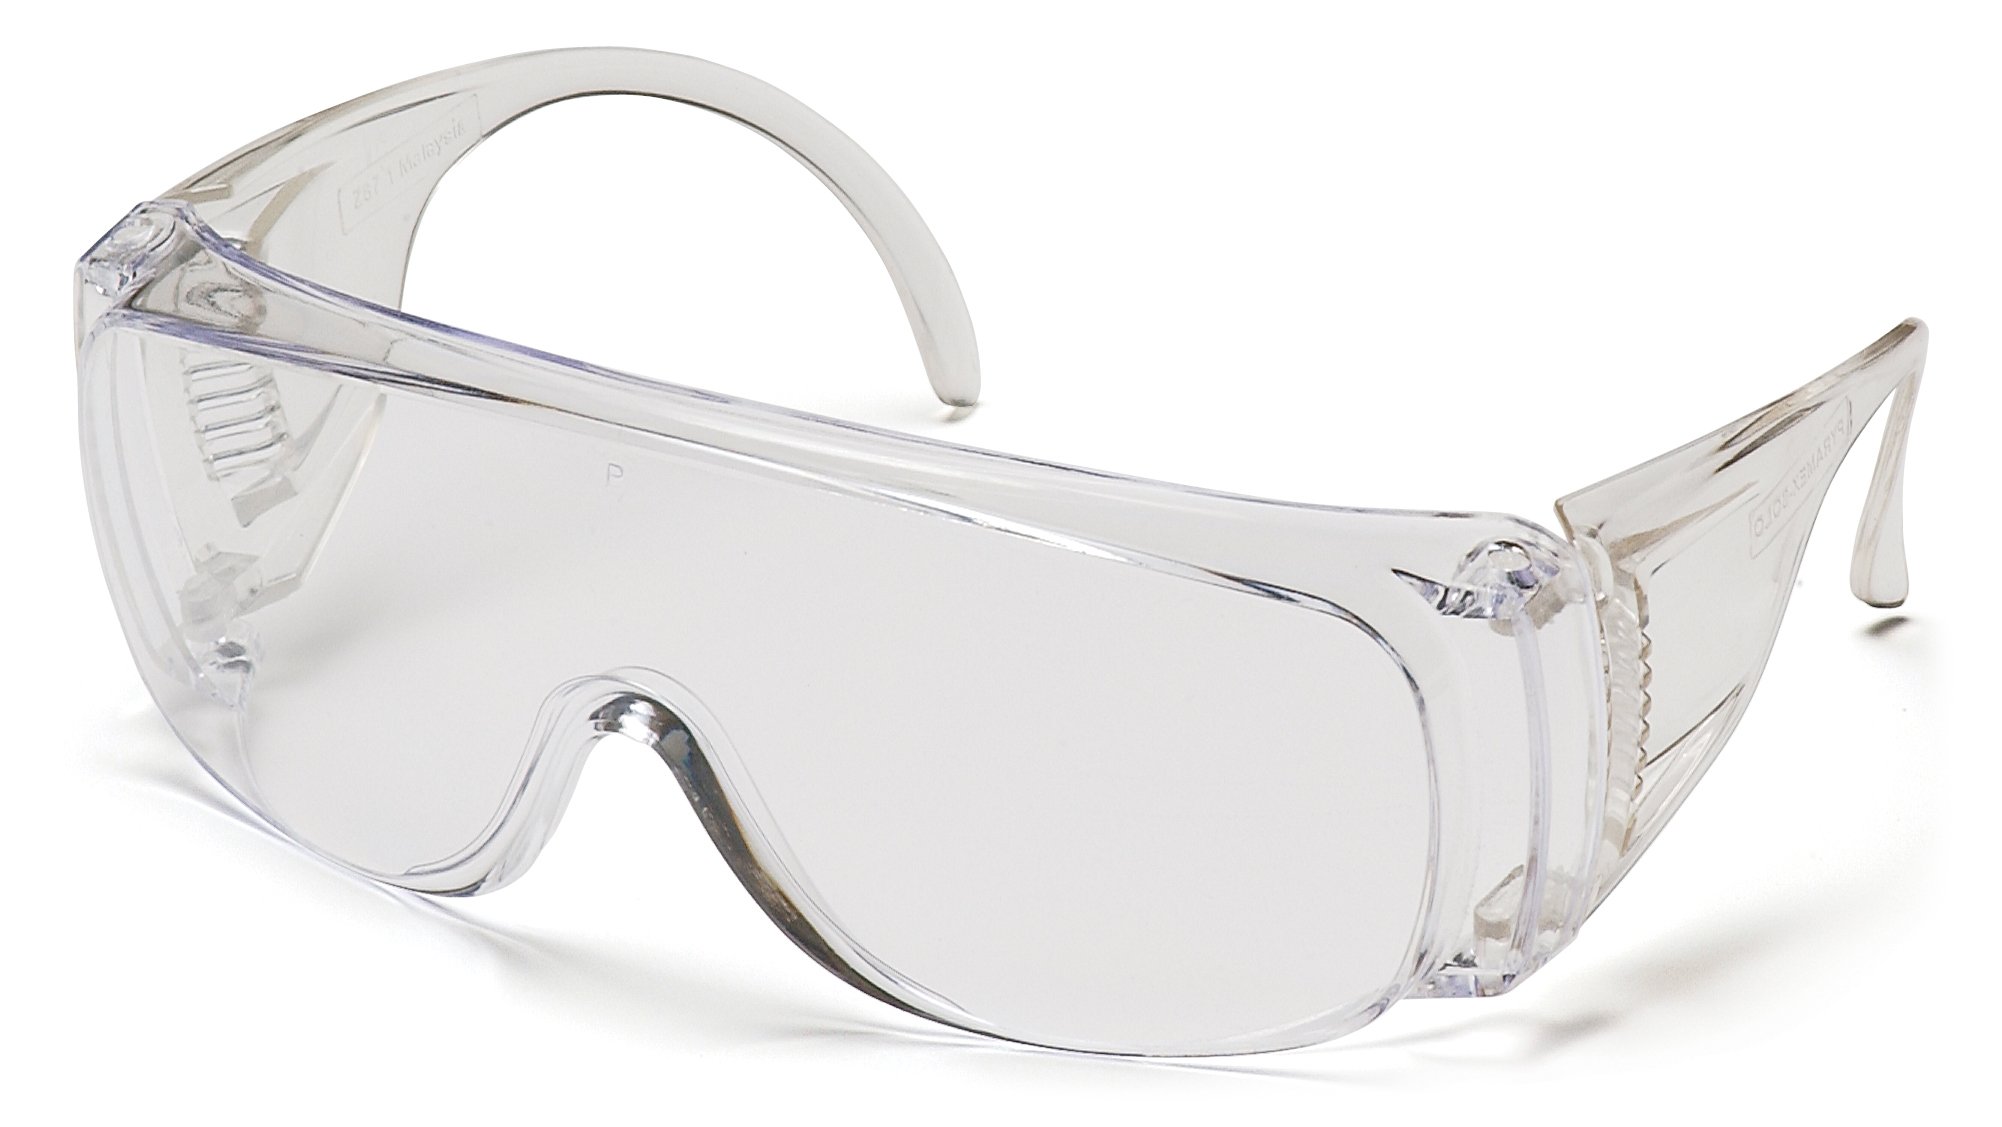 Pyramex Solo Jumbo Safety Eyewear Clear Lens Clear Frame, Jumbo Size(for Use Over Prescription Glasses) $1.99